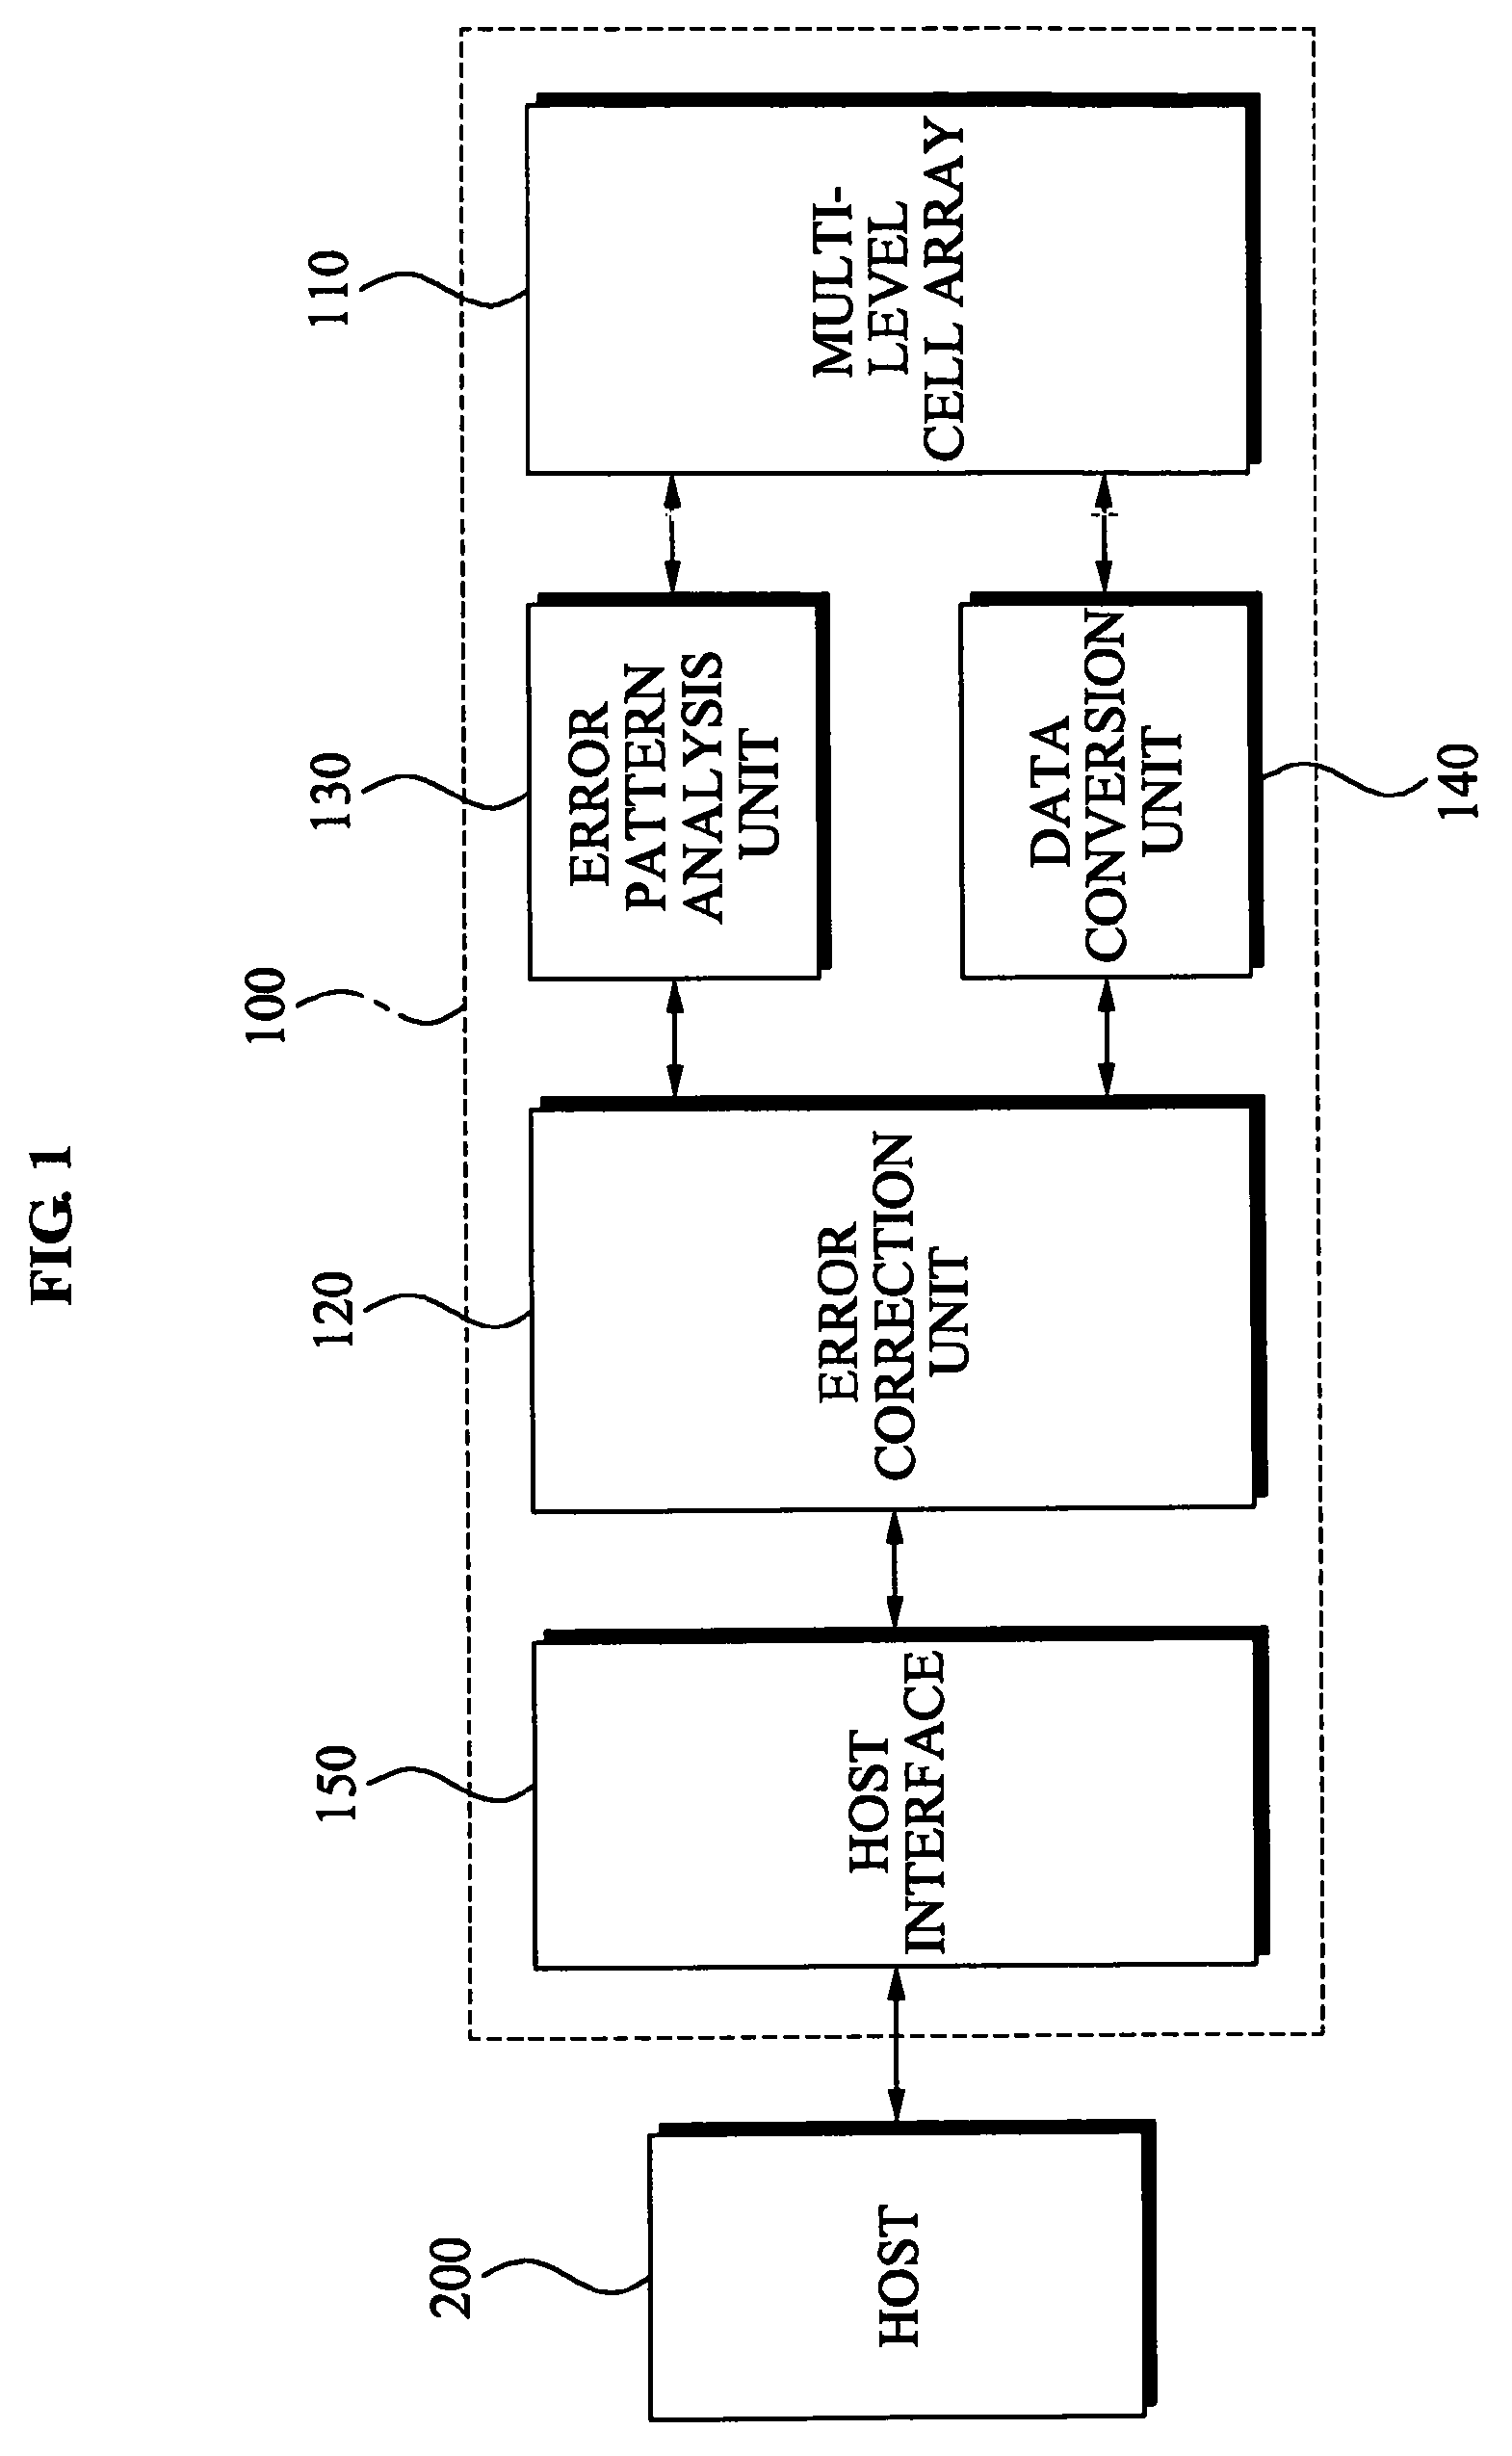 Memory device and method of storing data with error correction using codewords